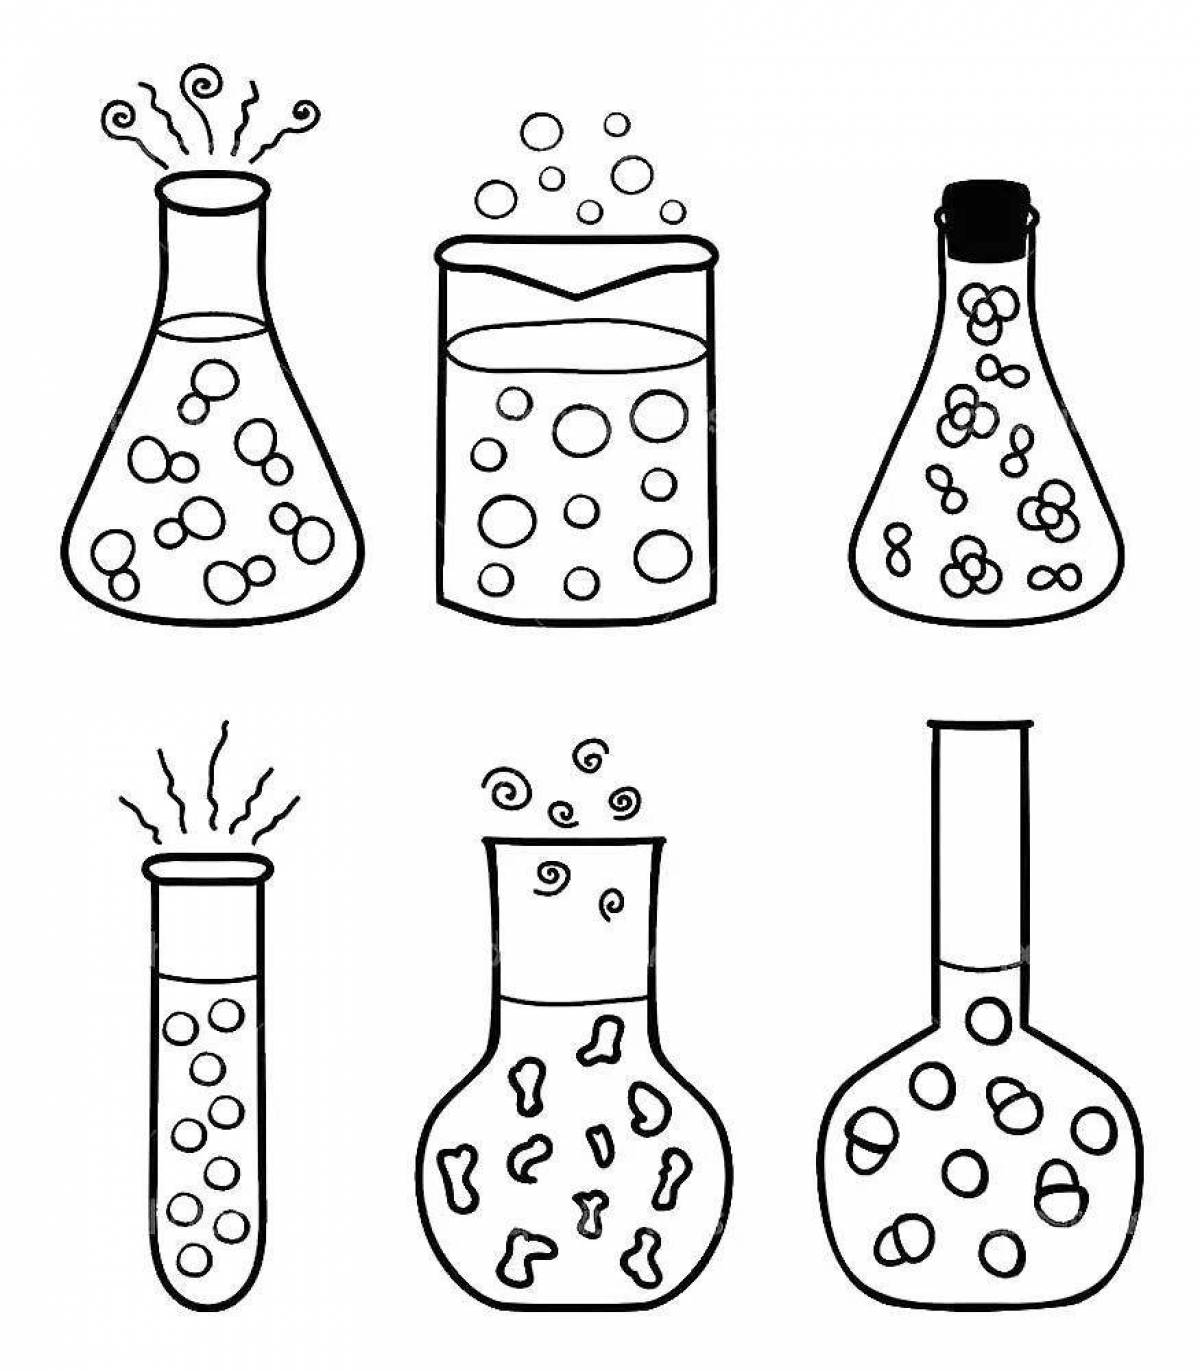 Fun Experiments Coloring Page